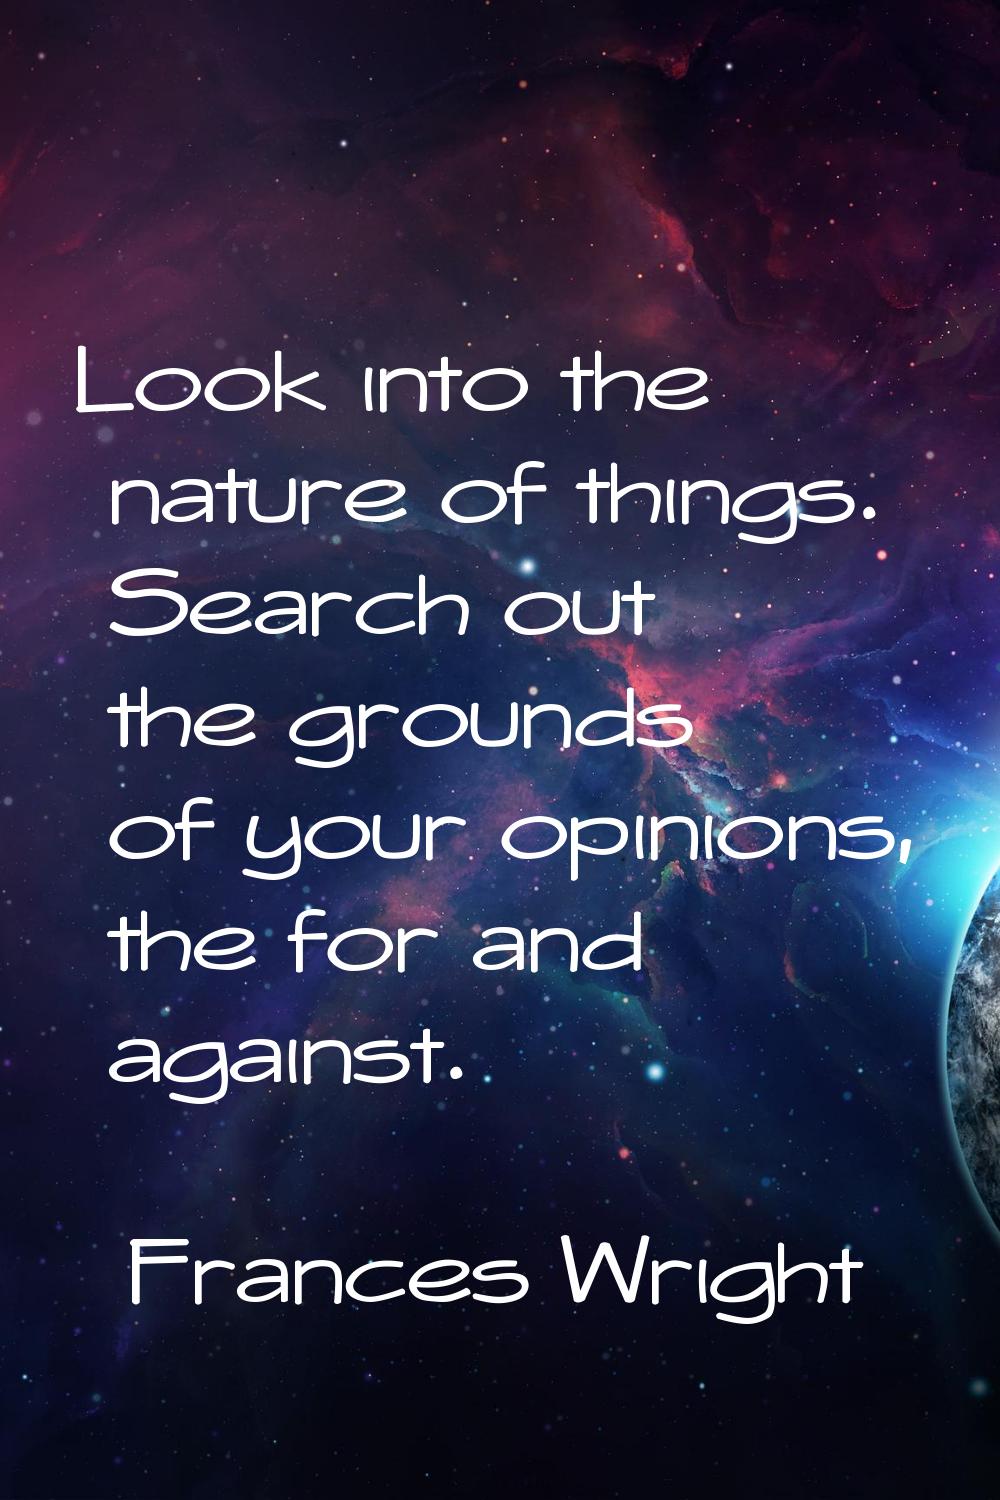 Look into the nature of things. Search out the grounds of your opinions, the for and against.